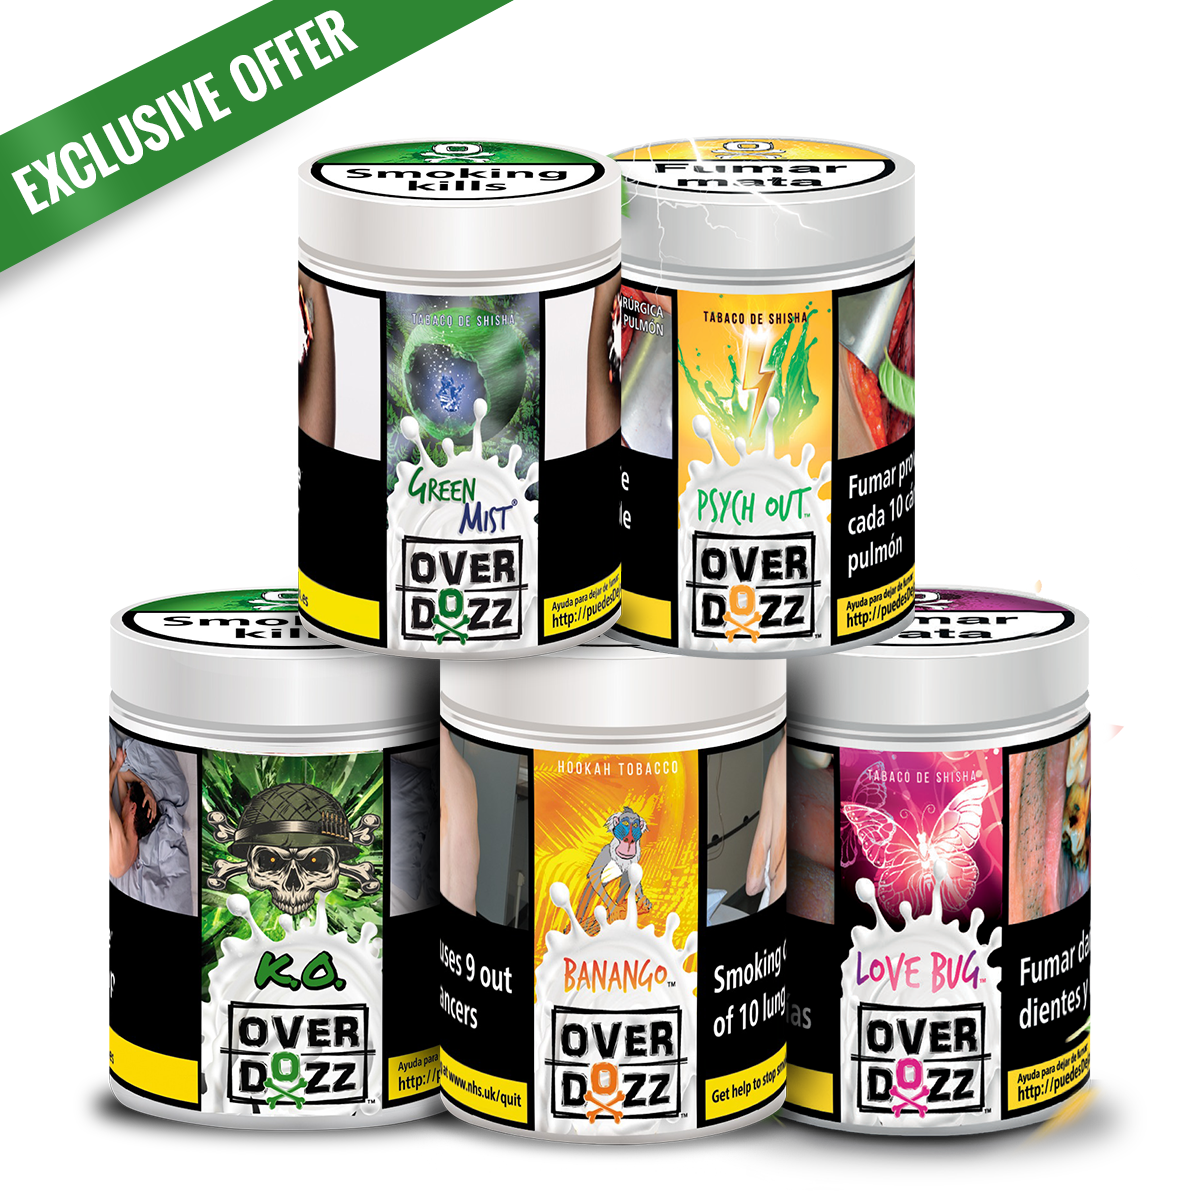 Overdozz Pack of 5 Flavours (Total 1kg)